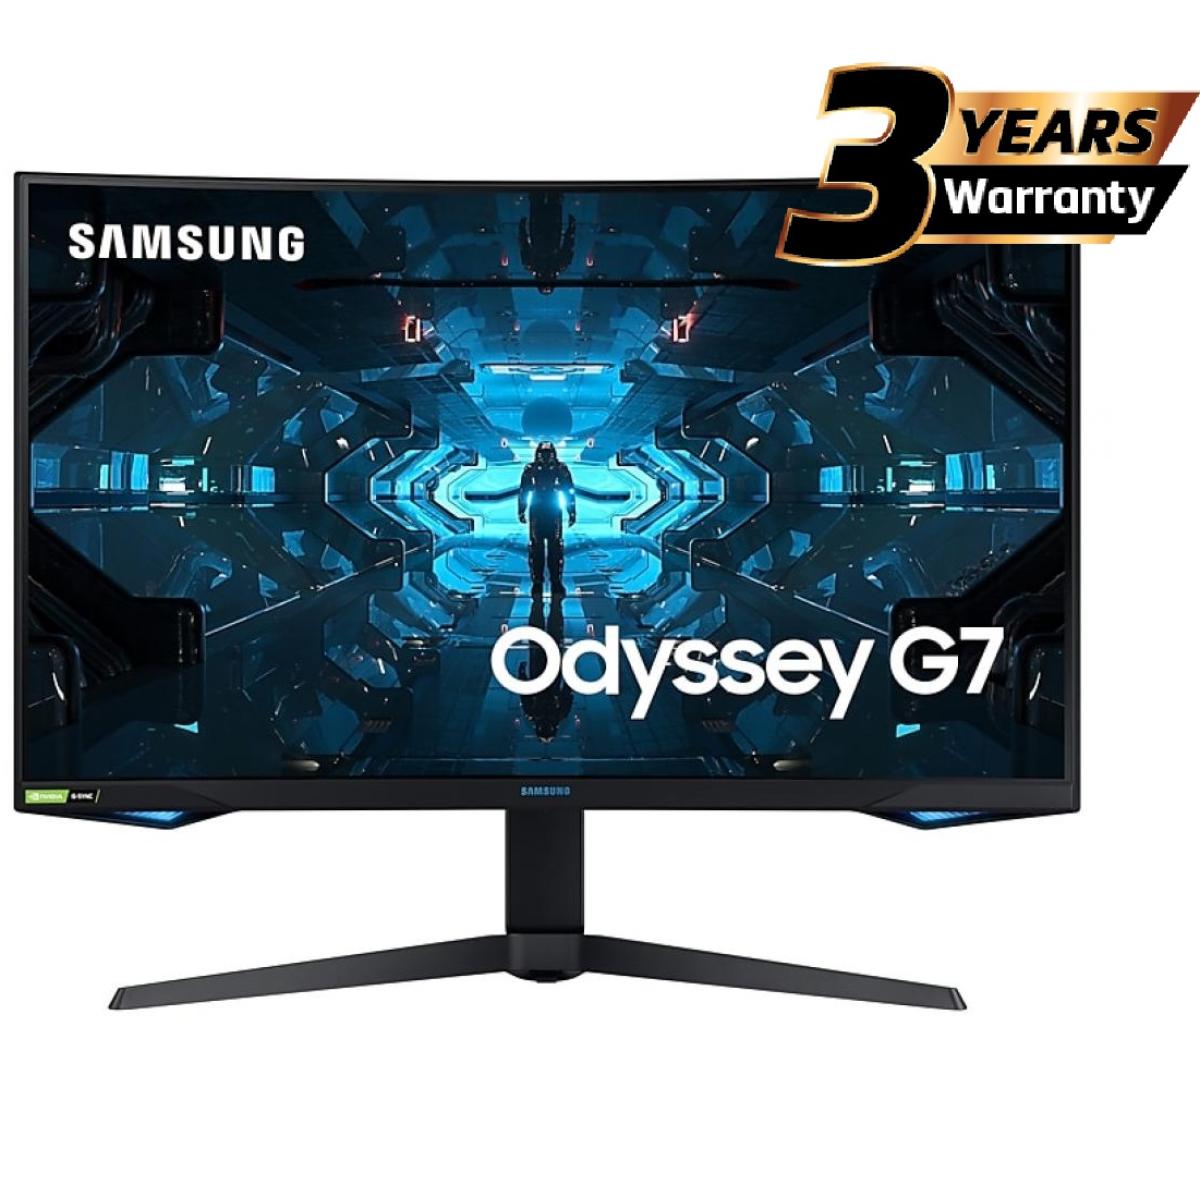 Samsung 32" Odyssey G7 WQHD 240Hz 1ms G-Sync Compatible HDR600 QLED Curved Gaming Monitor